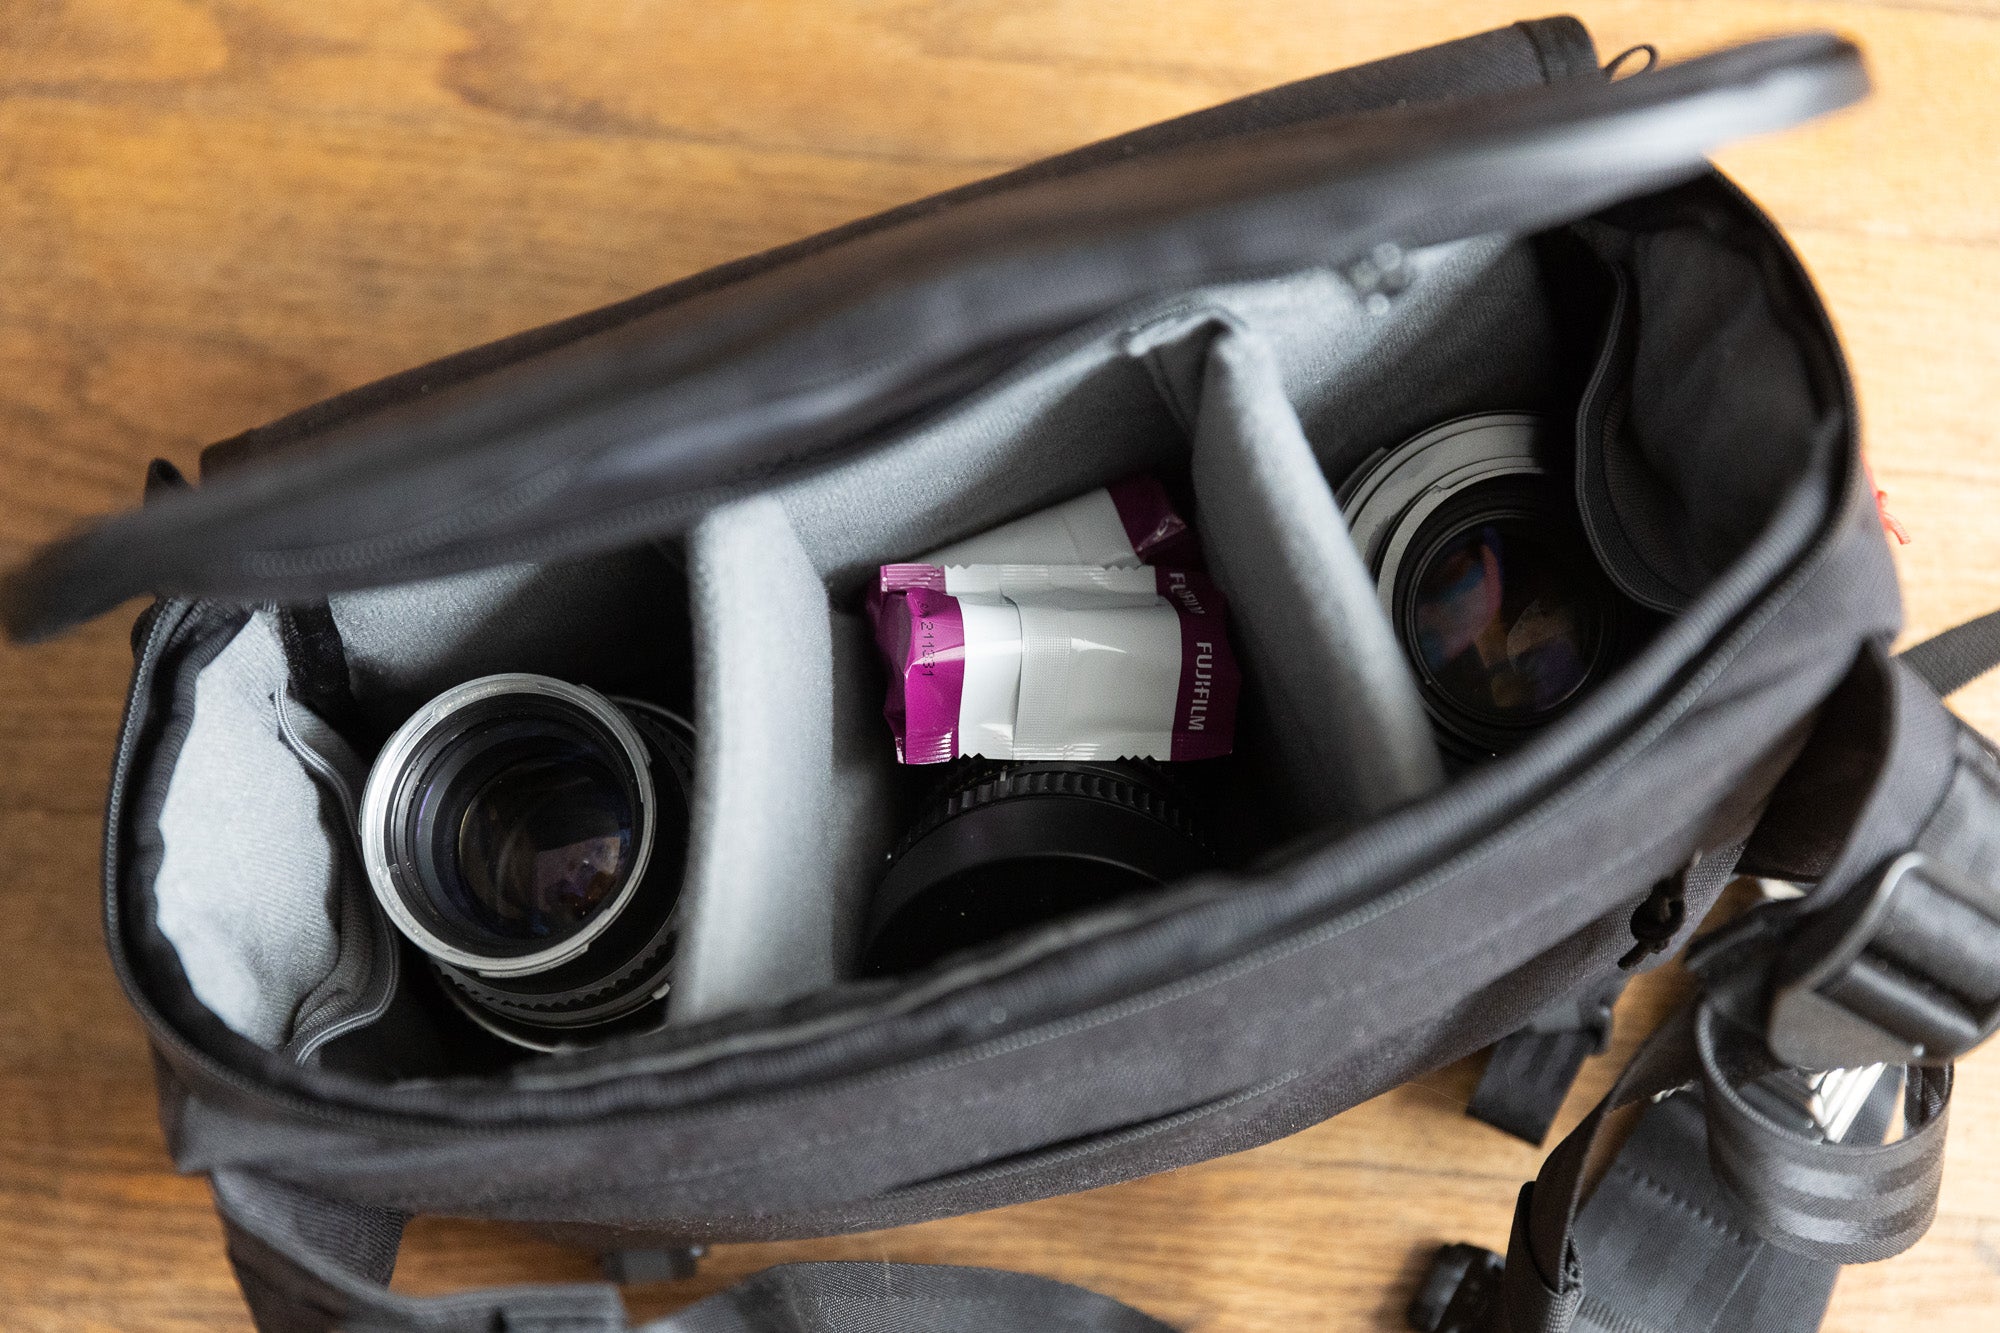 Chrome Niko 3.0 camera sling bag review: open with lenses in it